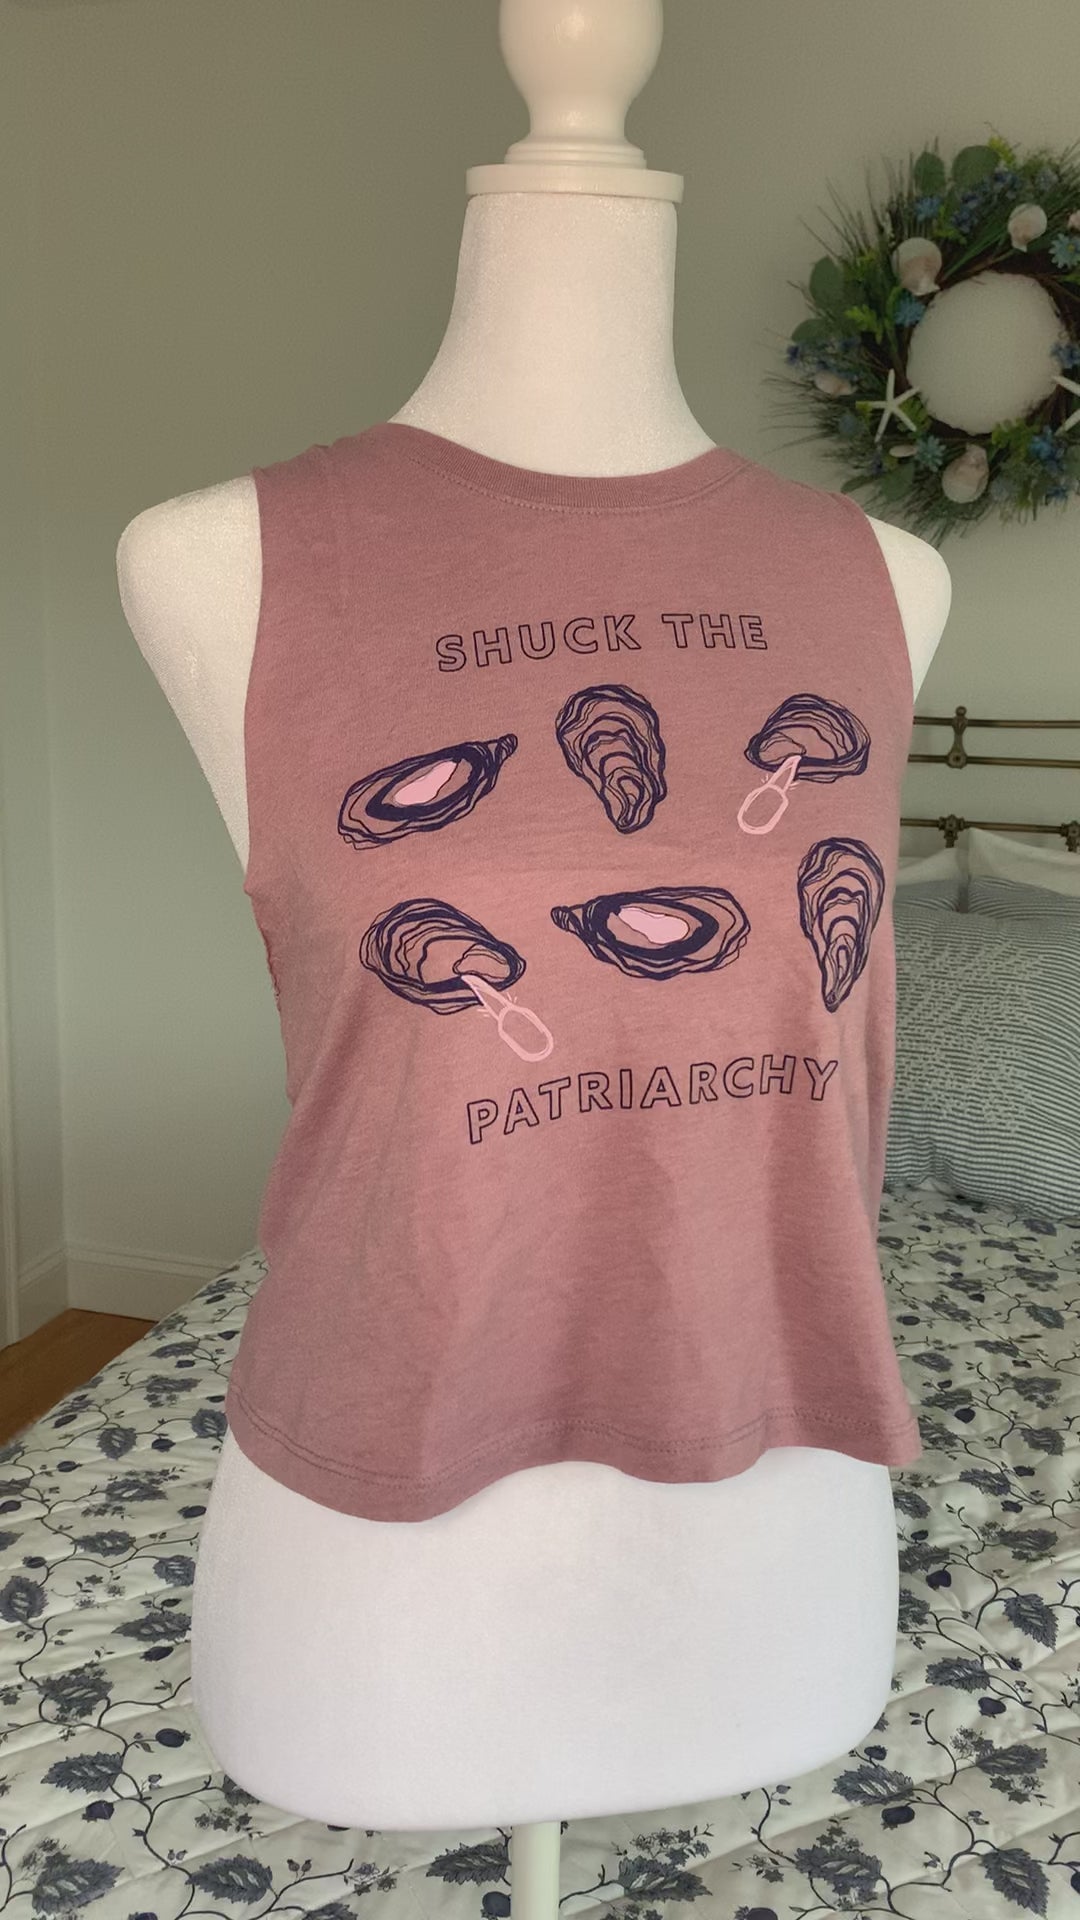 A cropped mauve tank that reads "Shuck the Patriarchy" hangs on a manikin